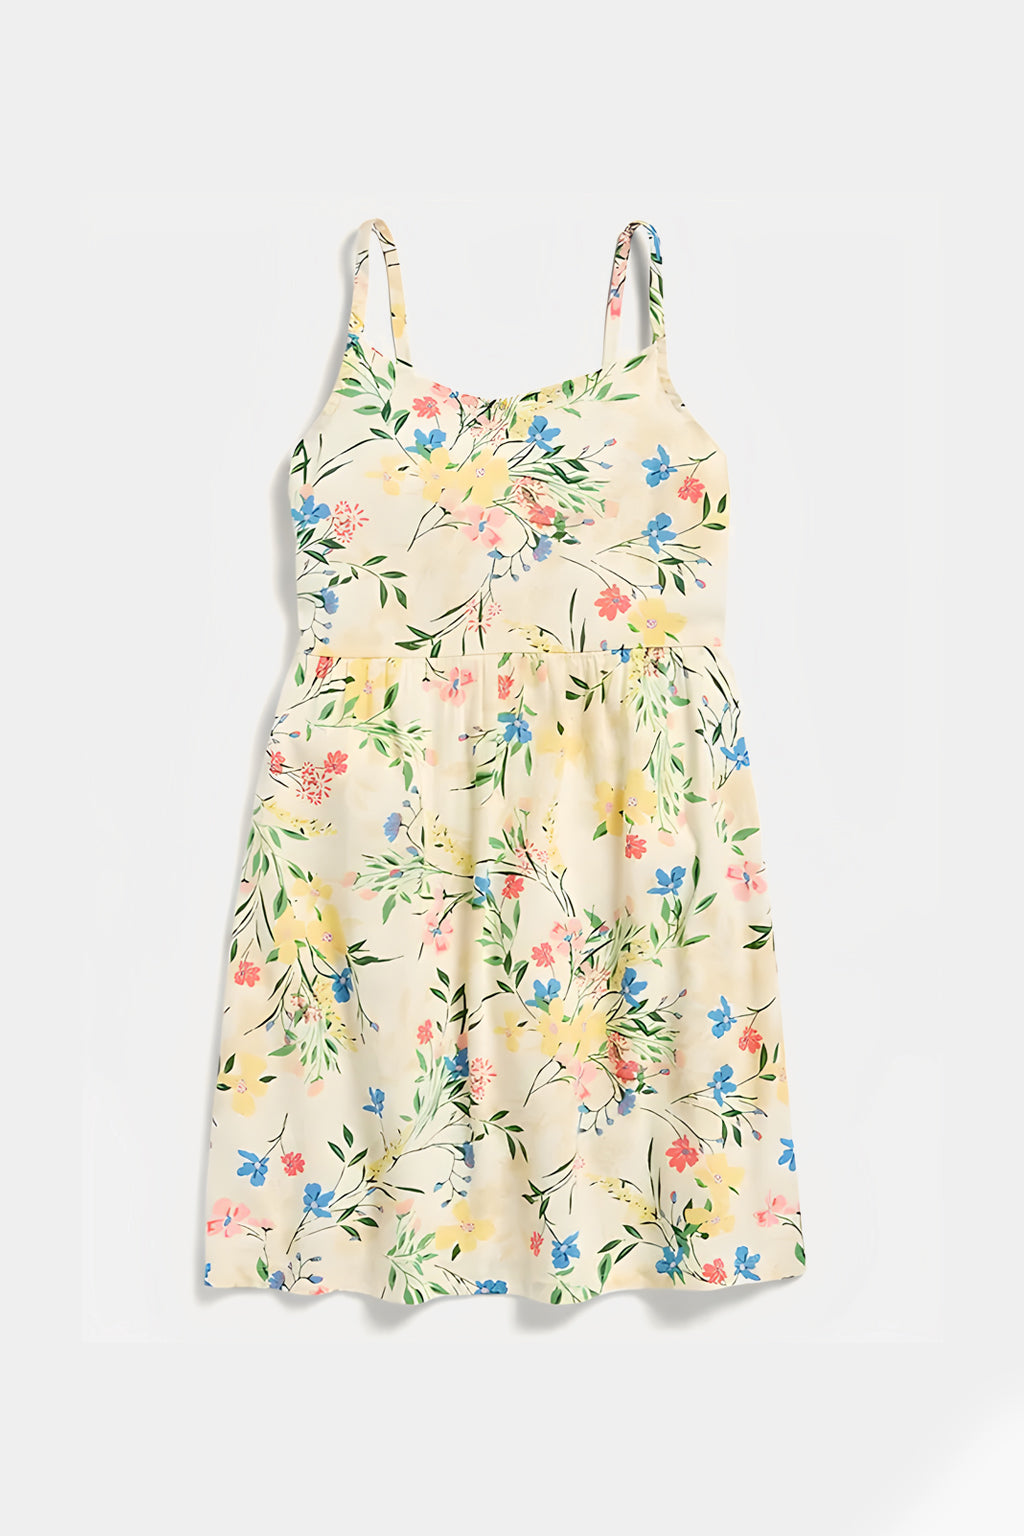 Old Navy - Fit & Flare Camisole Dress for Girls